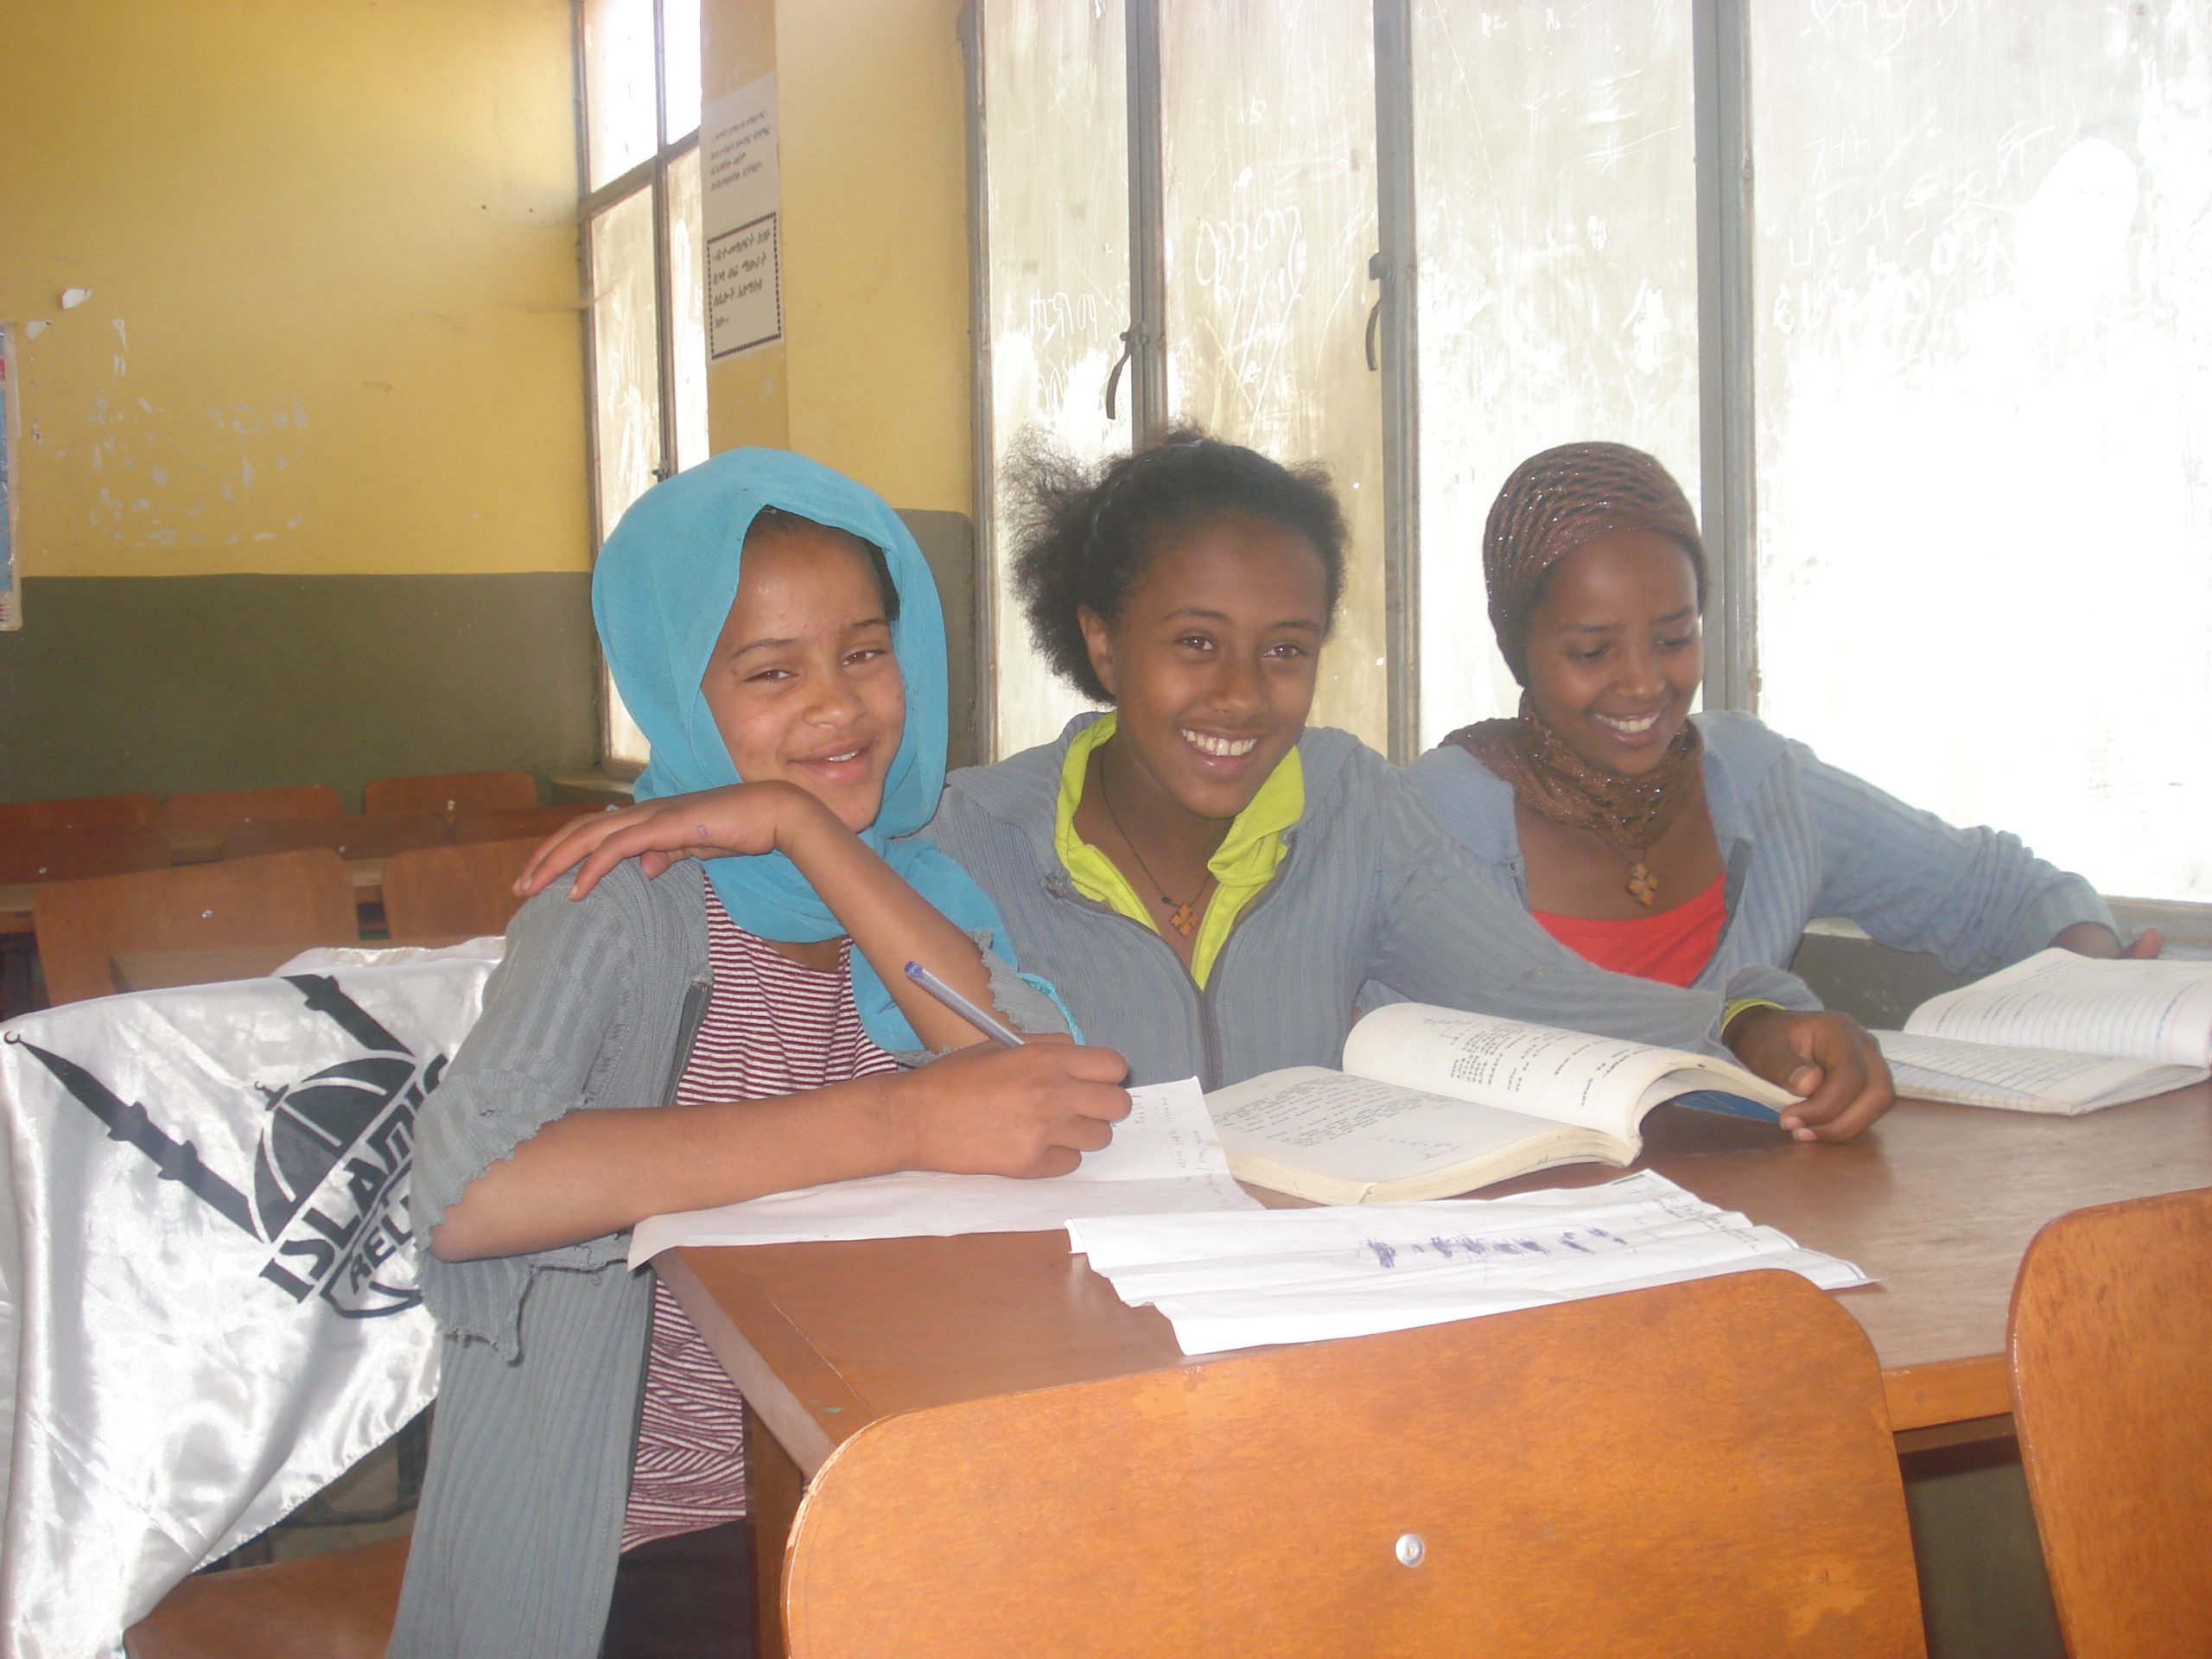 Strengthening youth services in Ethiopia